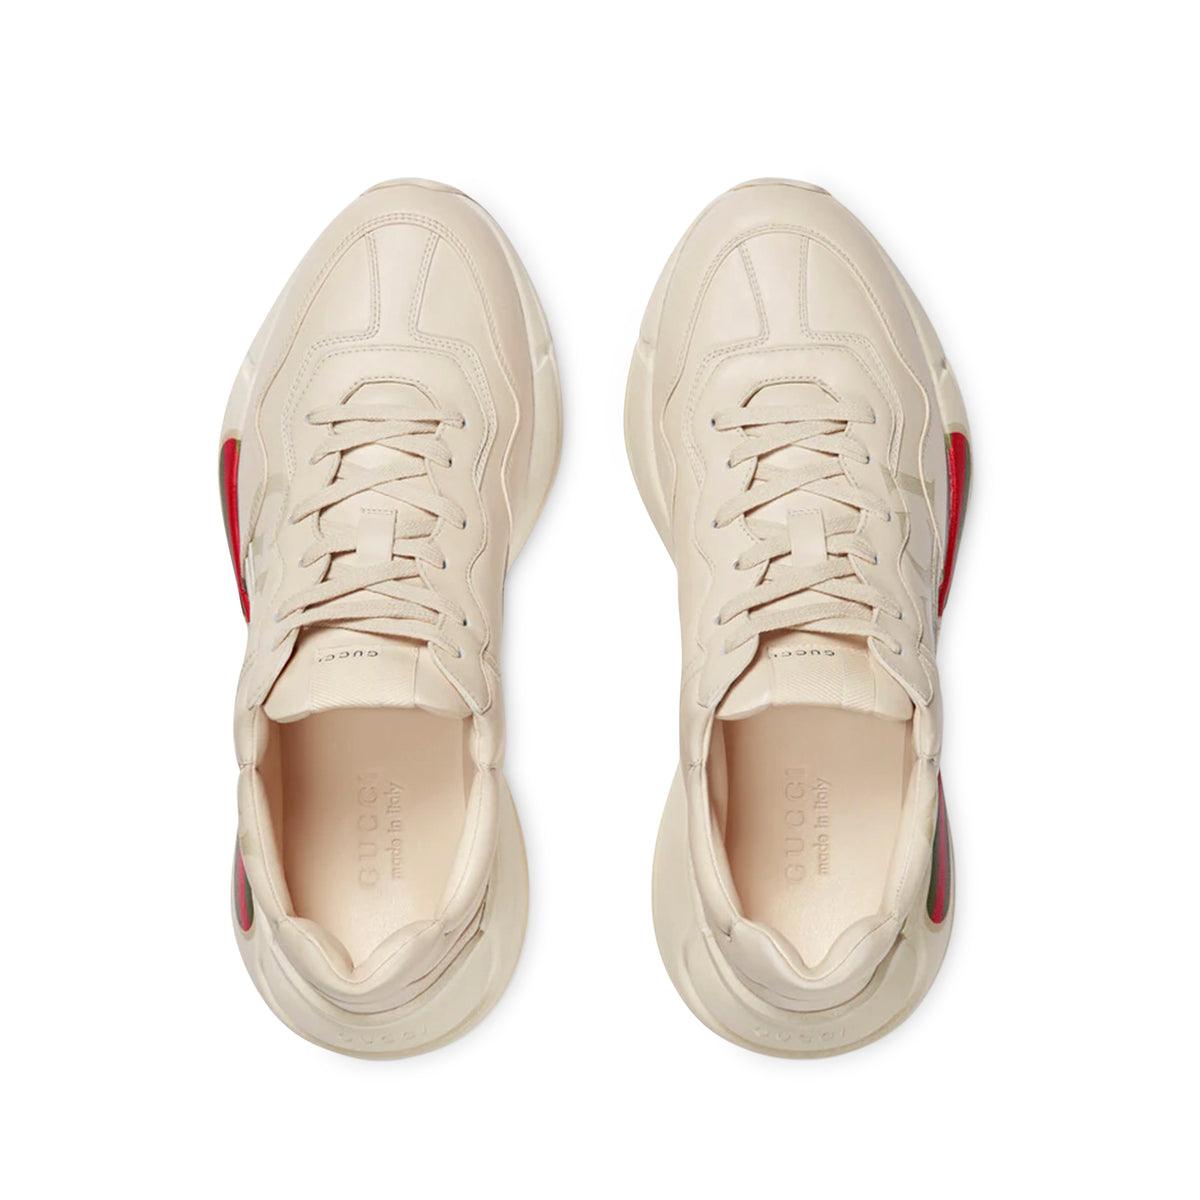 Lender Process Accurate Gucci Men's Rhyton Logo Leather Sneaker (Ivory) – DSMNY E-SHOP